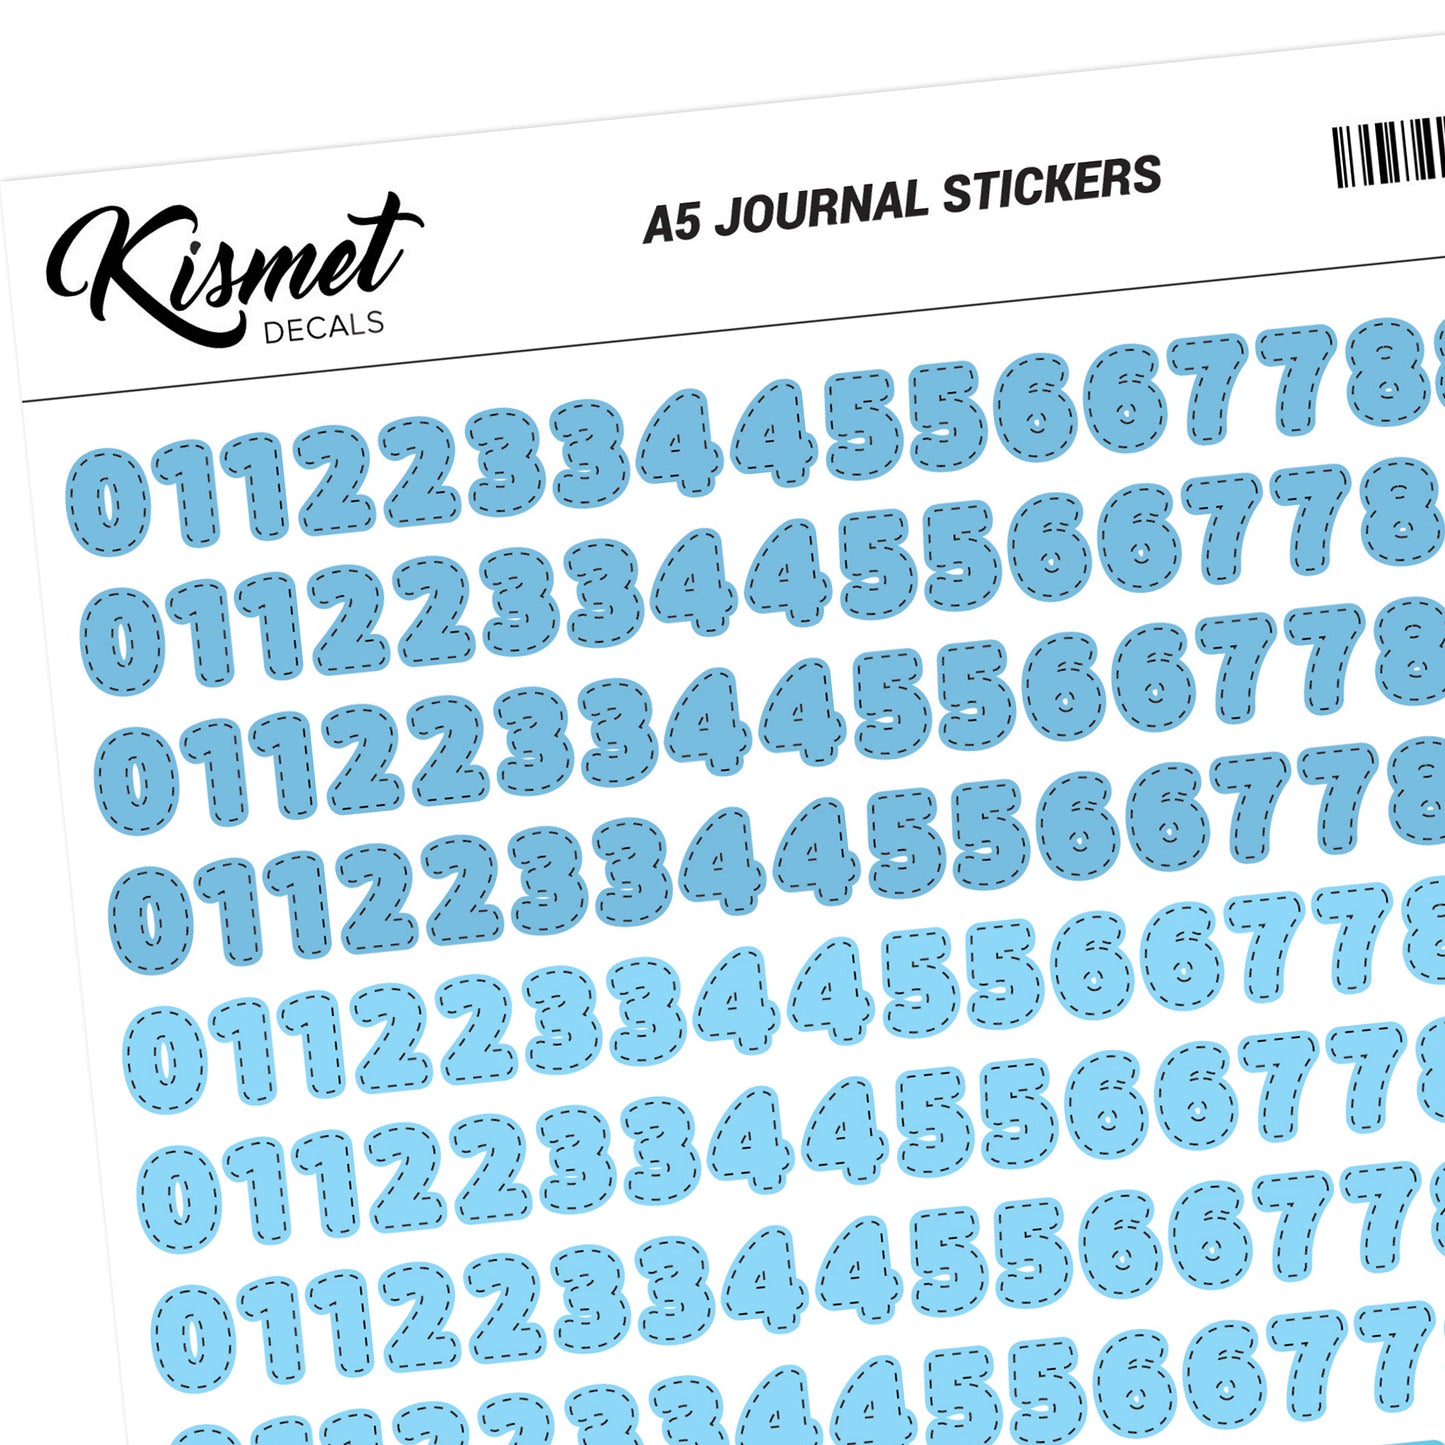 A5 Solid Number Stickers - 5.3" X 8.3" - Craft Journal Snail Mail Planner Journal Diary Paper Sticker Sheet